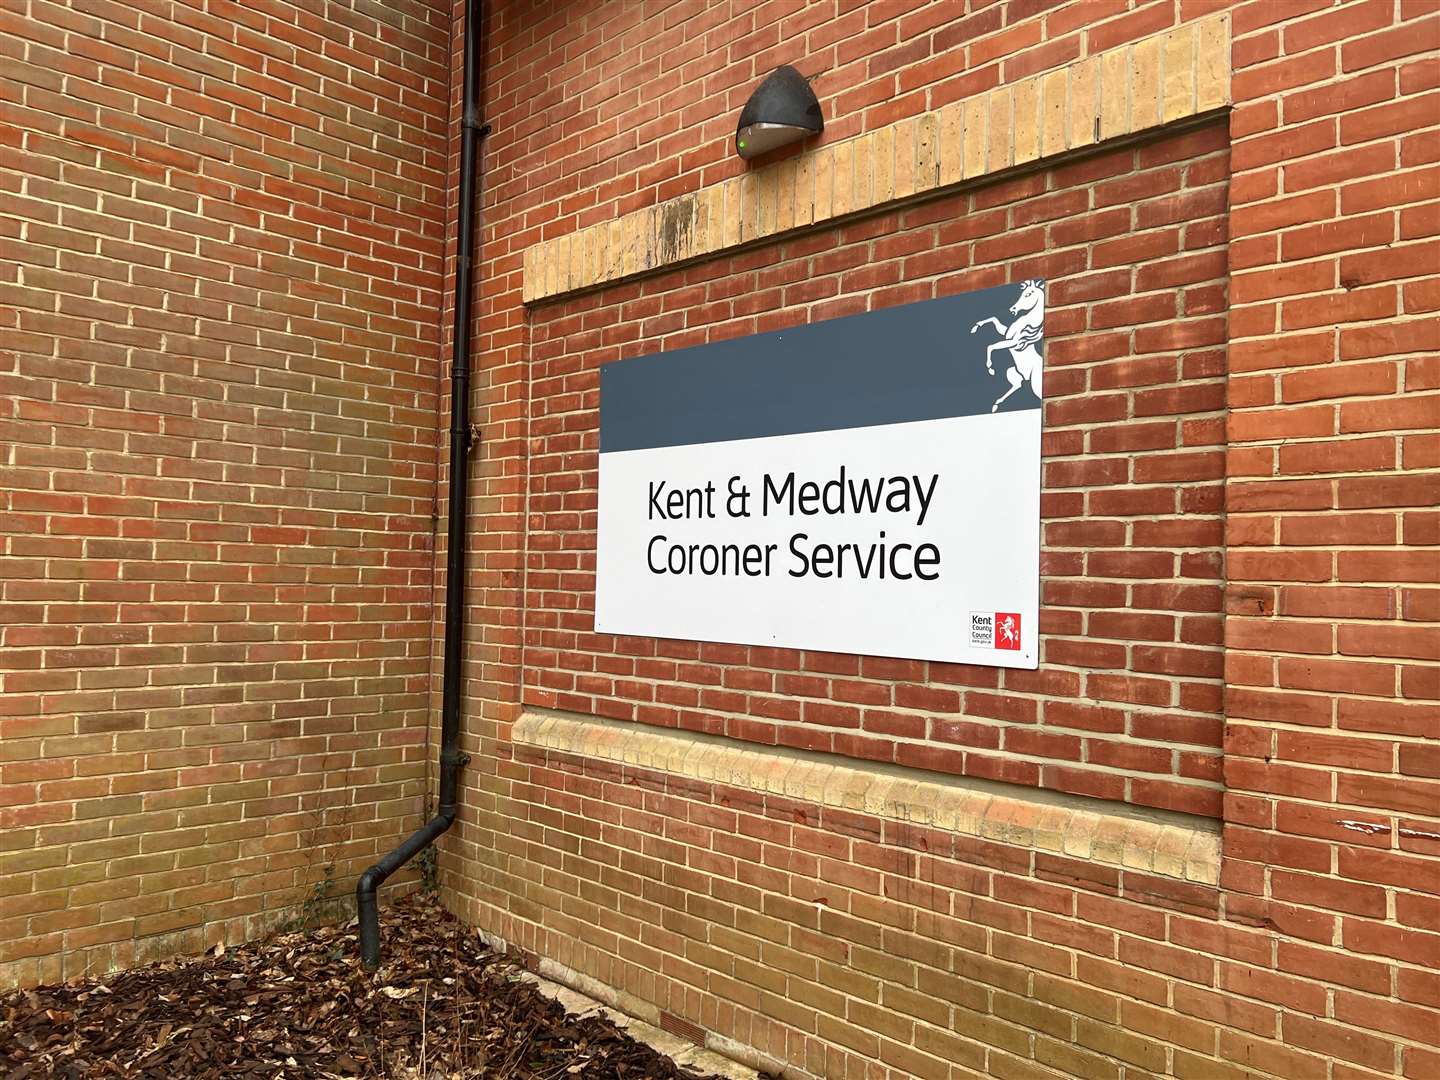 The Kent & Medway Coroner Service